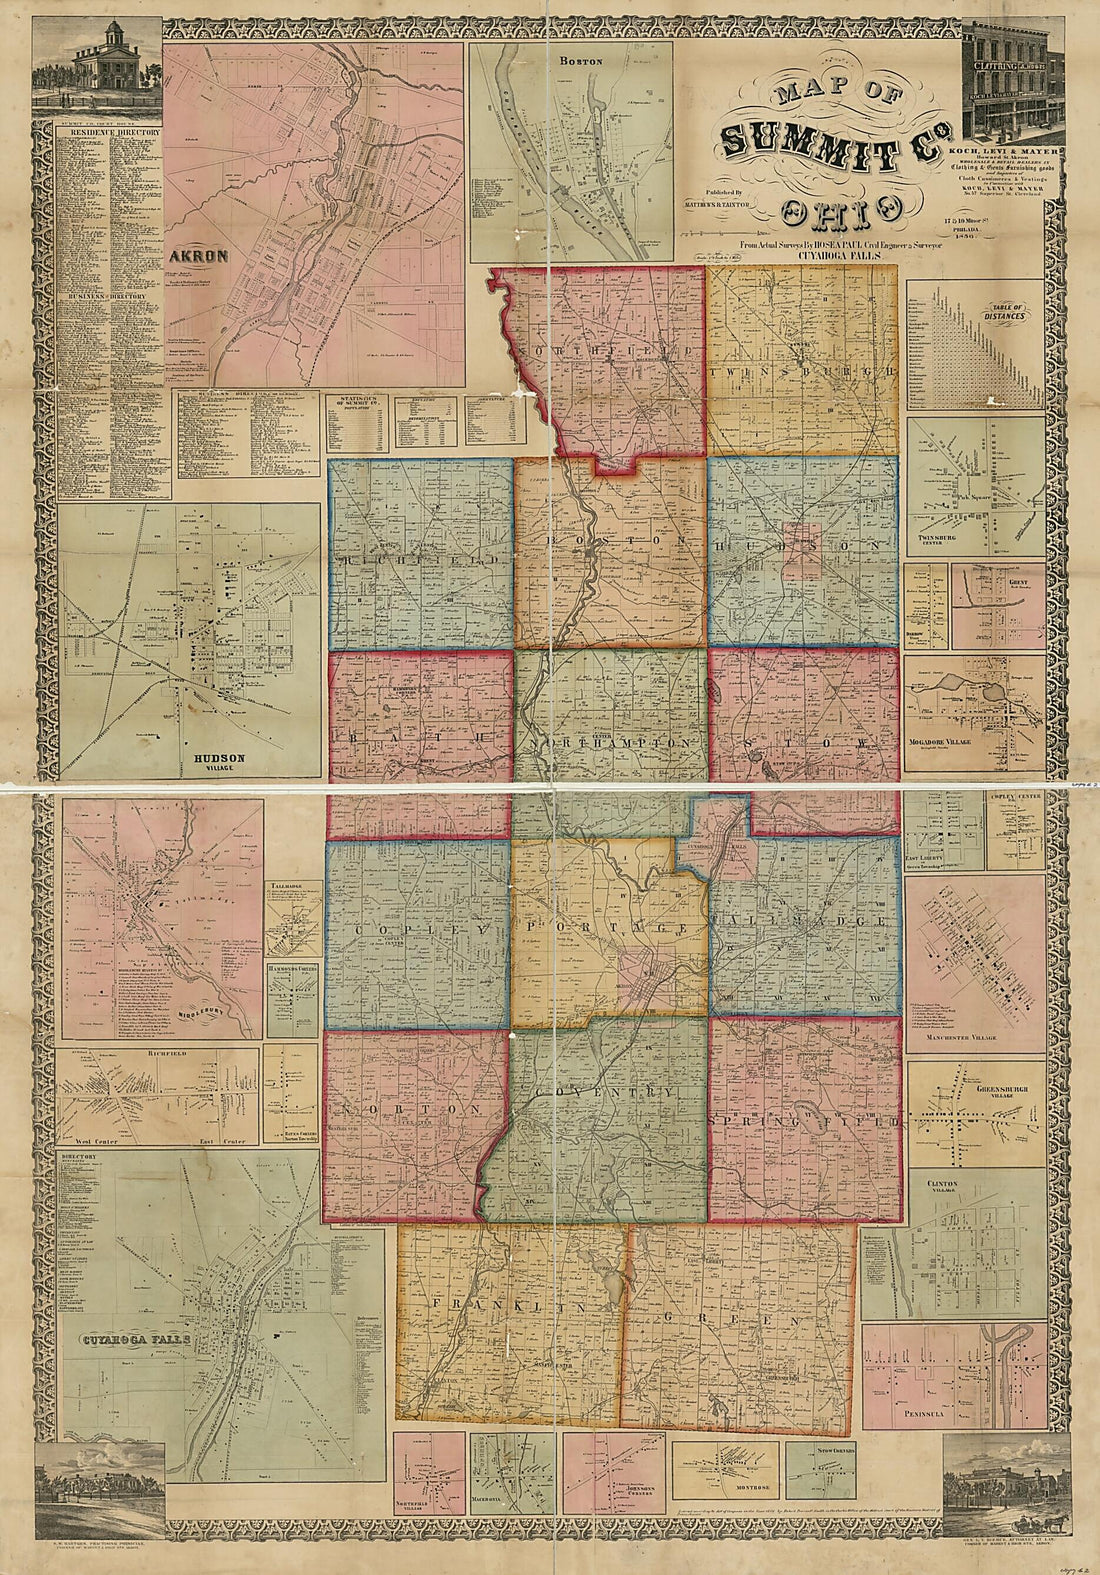 This old map of Map of Summit County, Ohio from 1856 was created by Hosea Paul in 1856